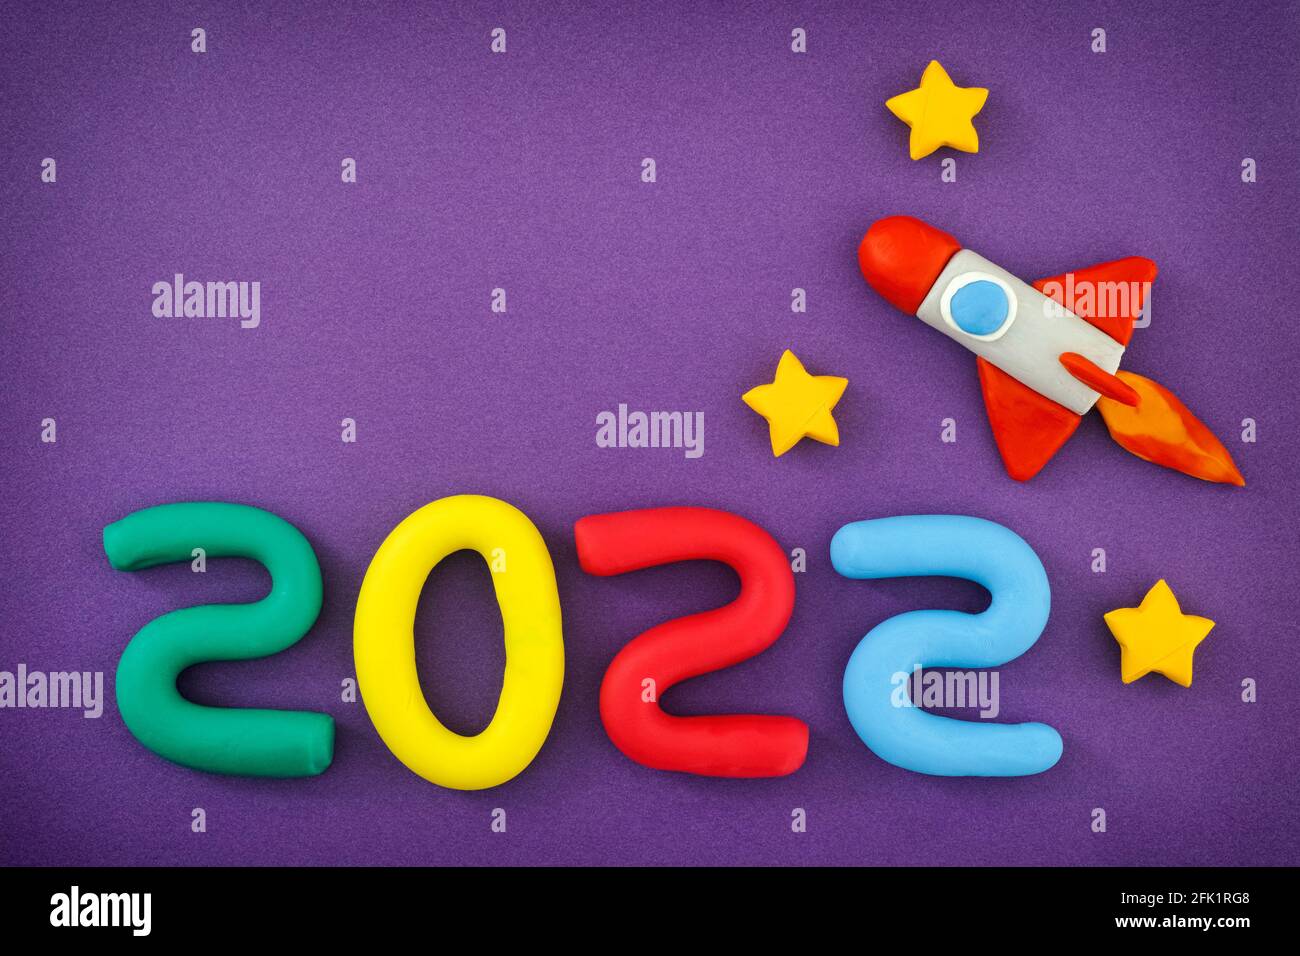 The New Year 2022. The space rocket and Numbers are made out of play clay (plasticine). Stock Photo